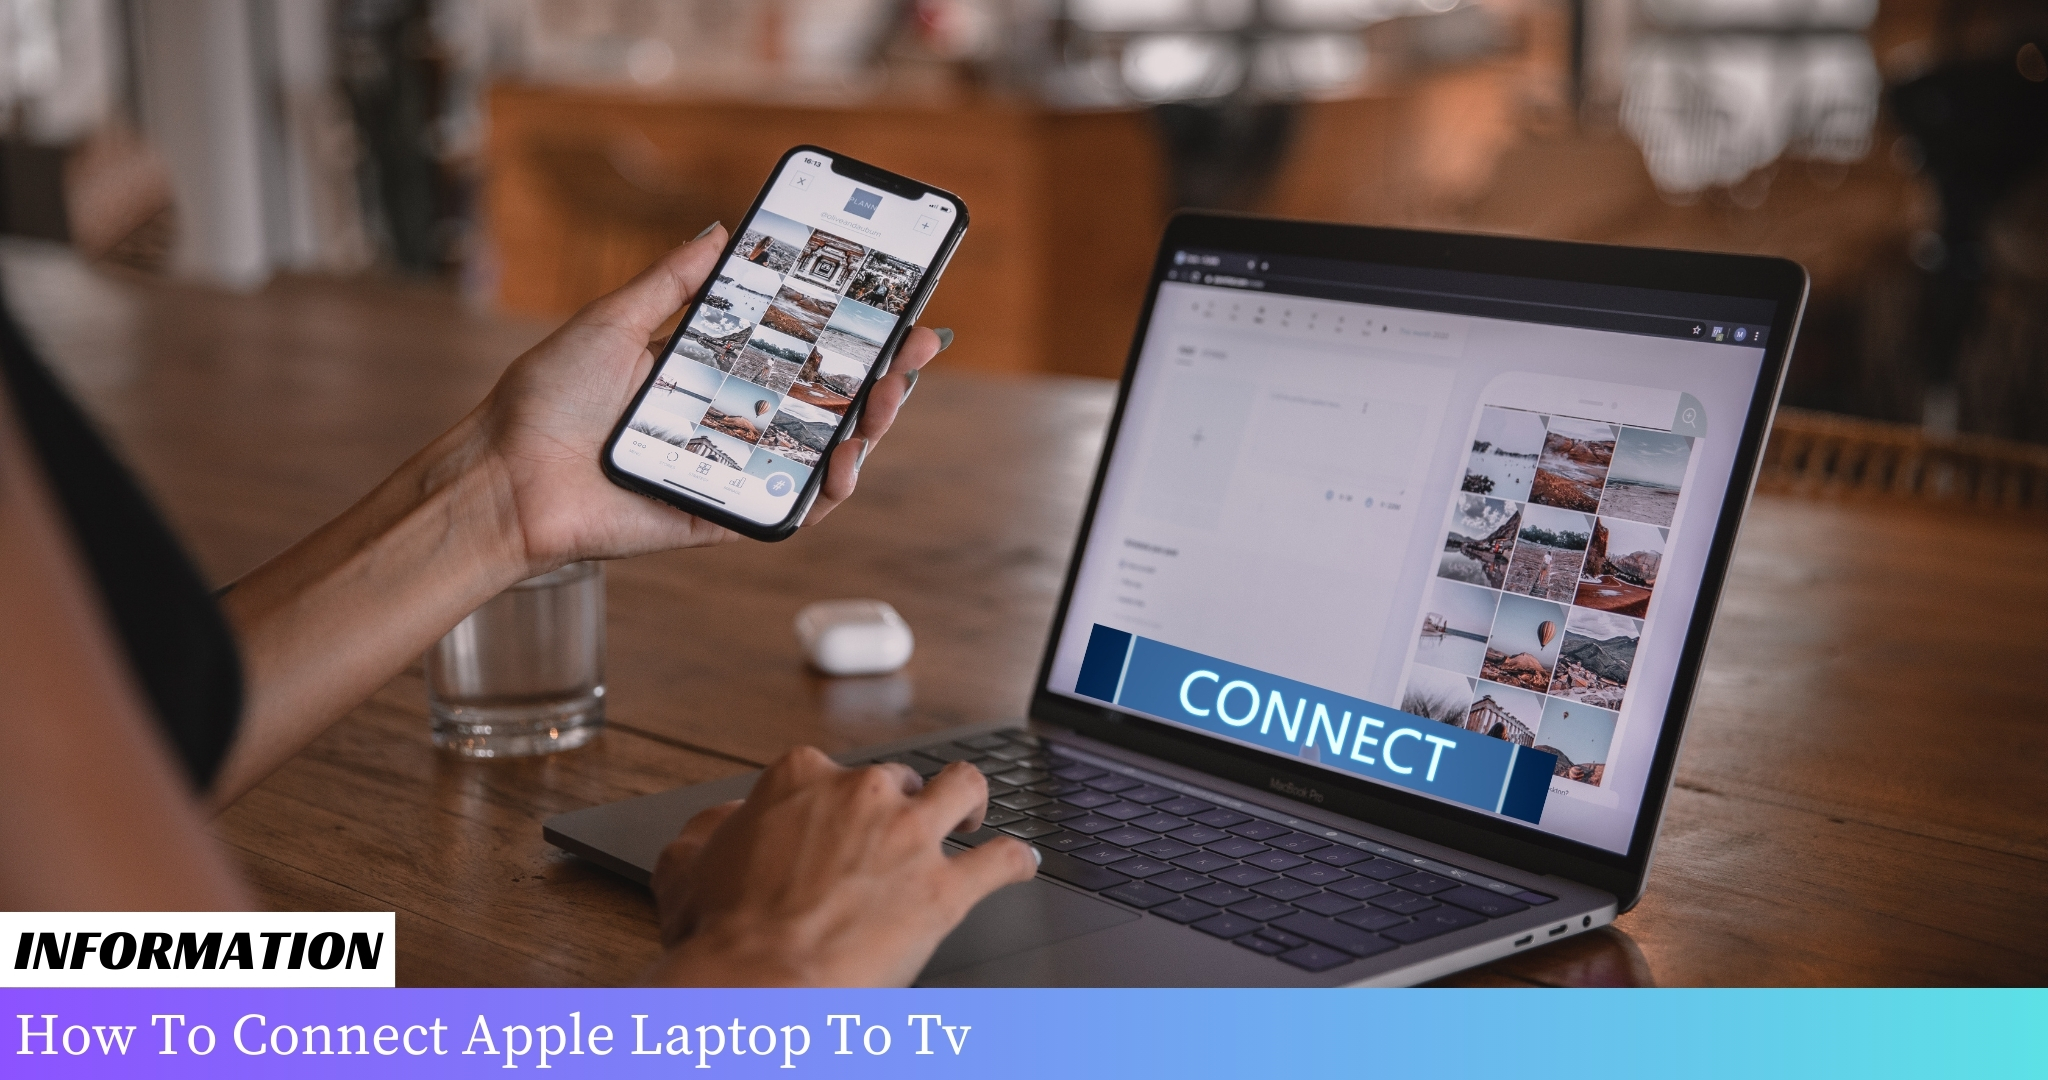 Connecting an iPad to a TV: Use an HDMI cable to link your iPad's Lightning port to the TV's HDMI input.